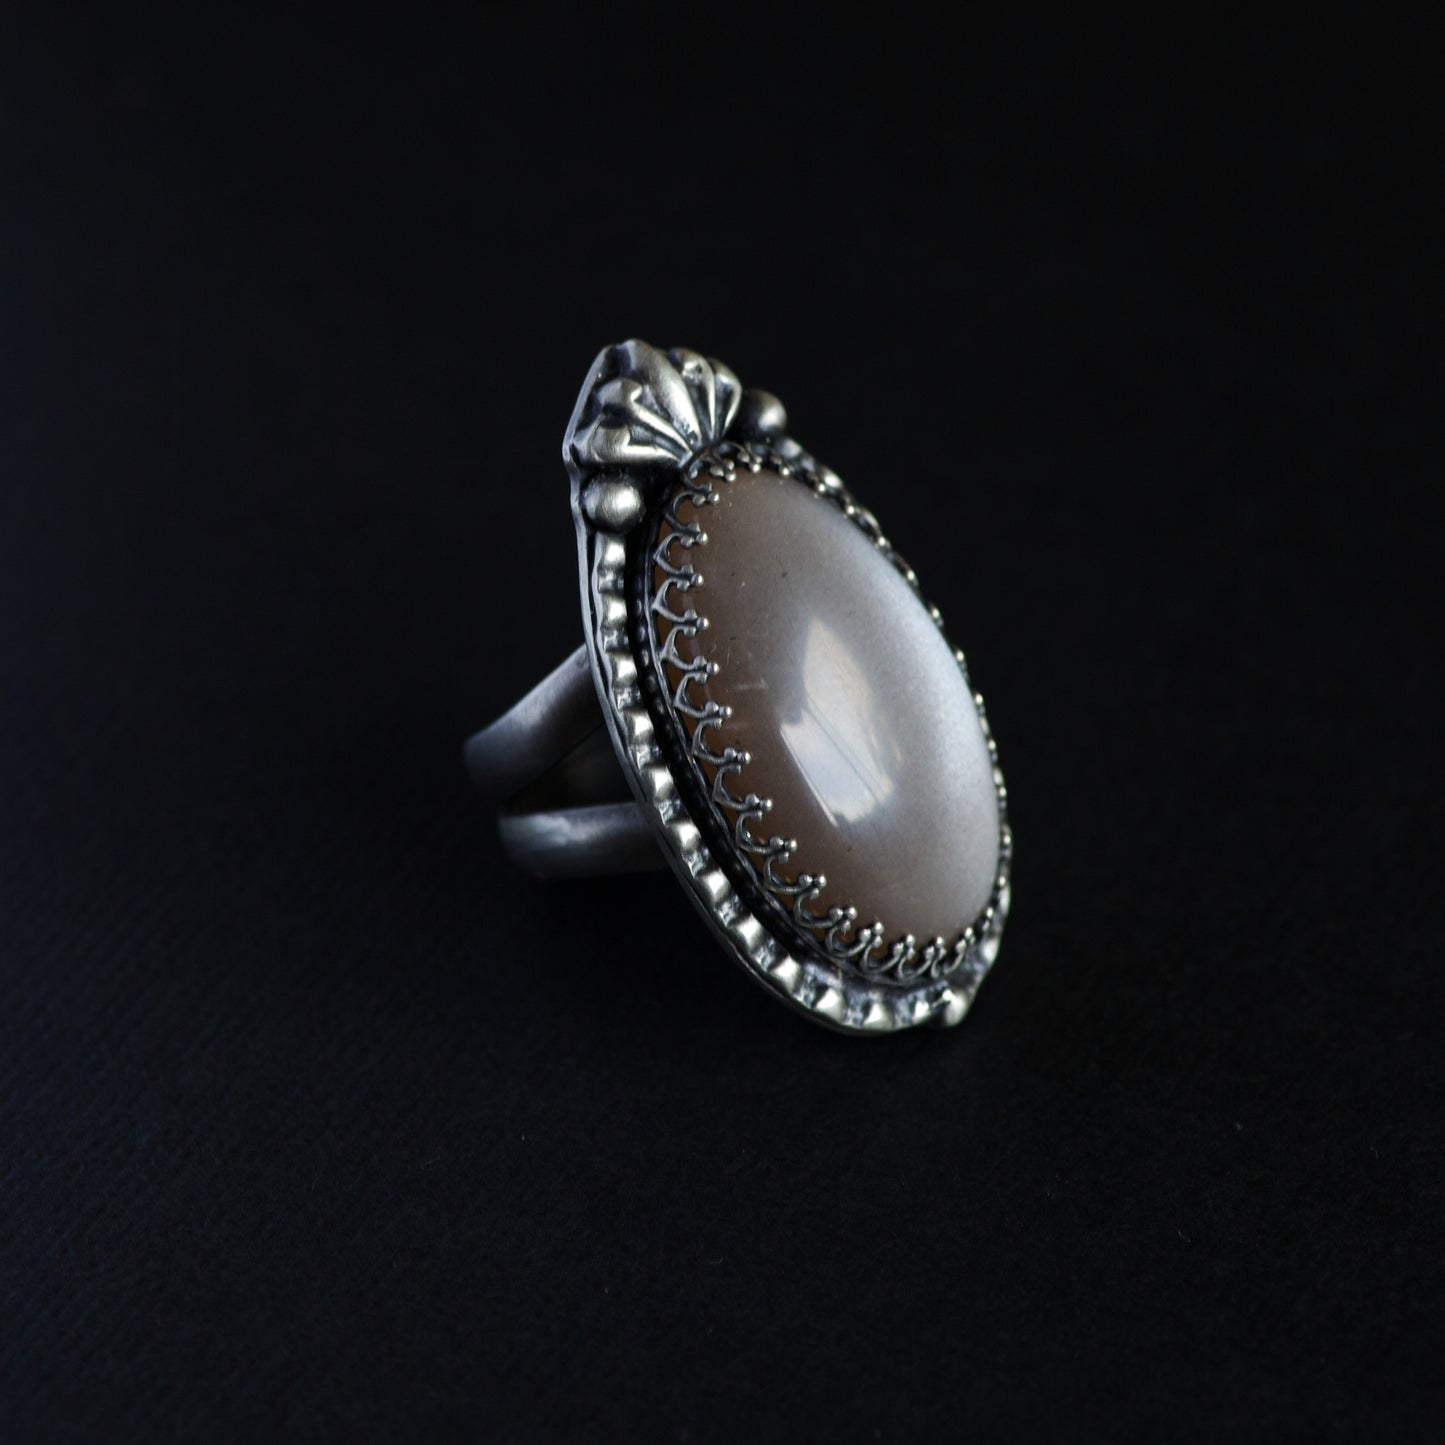 Foggy Winter Gary Moonstone Ring - Size: 7 or N 1/2